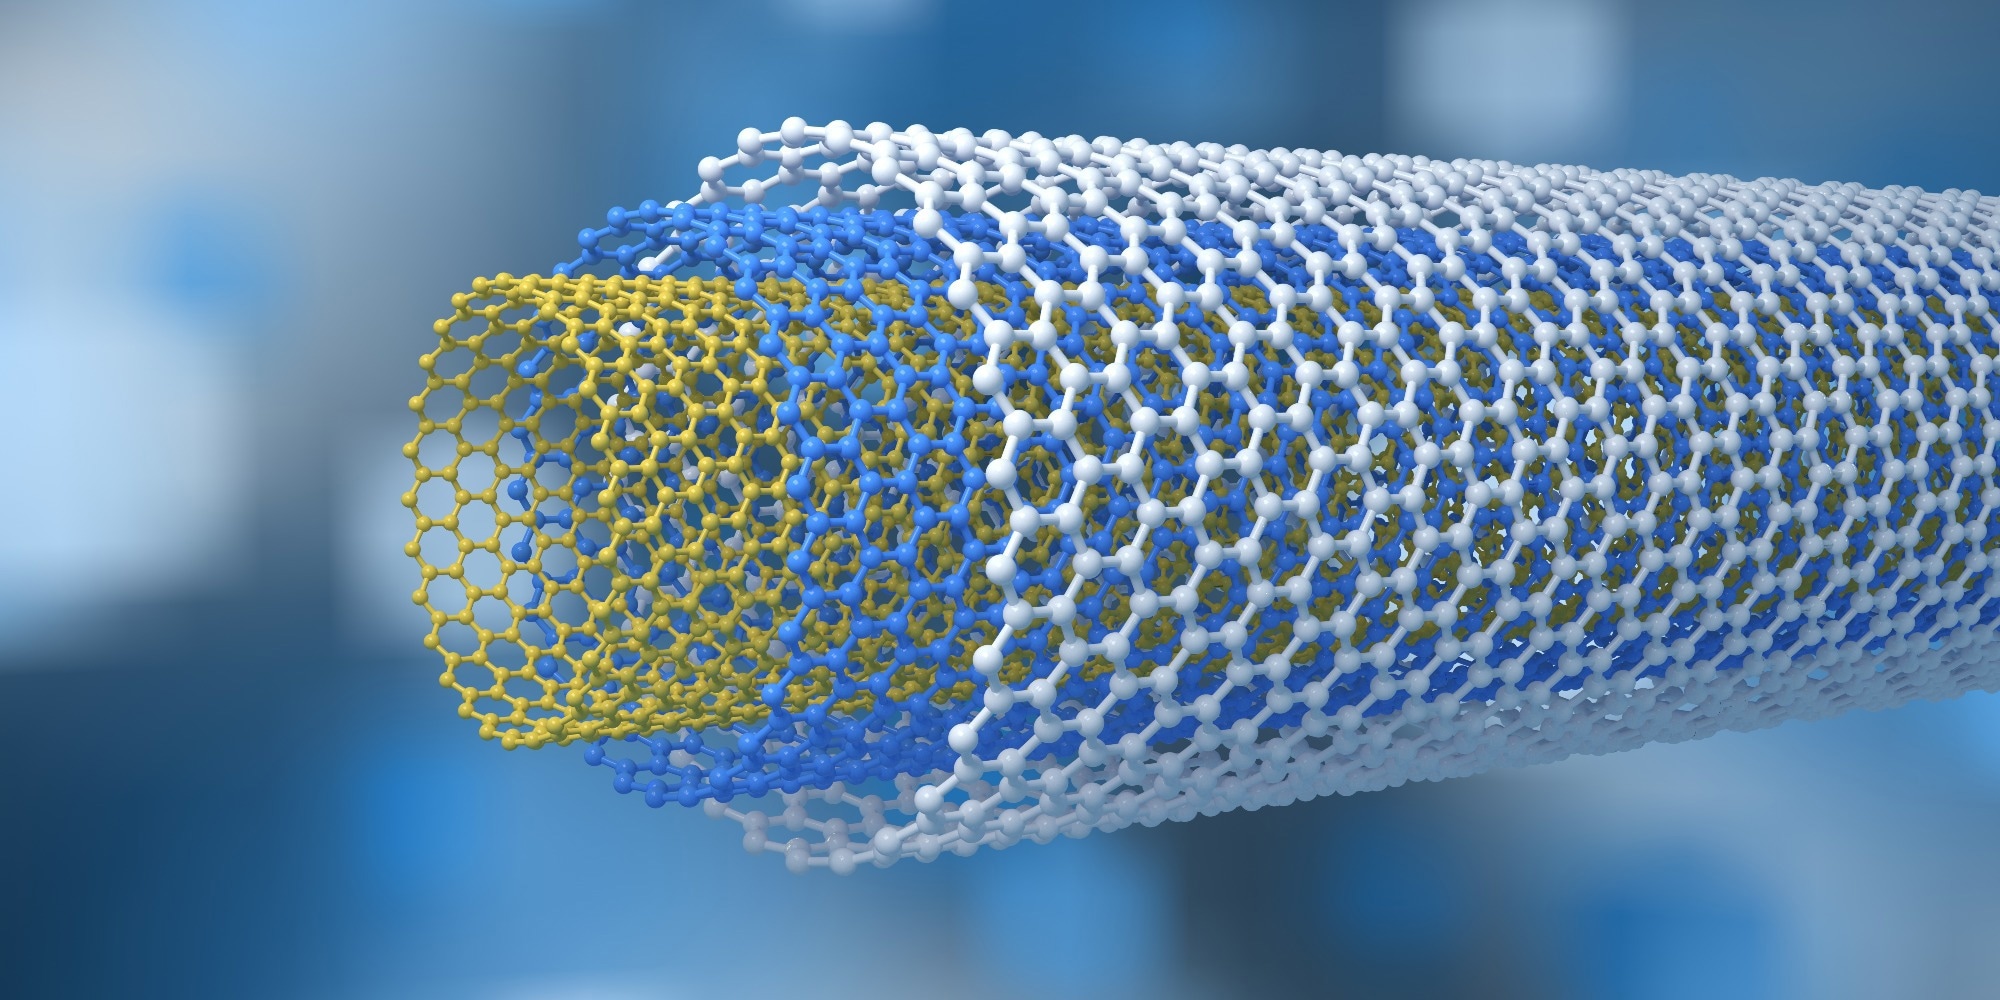 Carbon Nanotube Research Leads Sustainable Materials Revolution